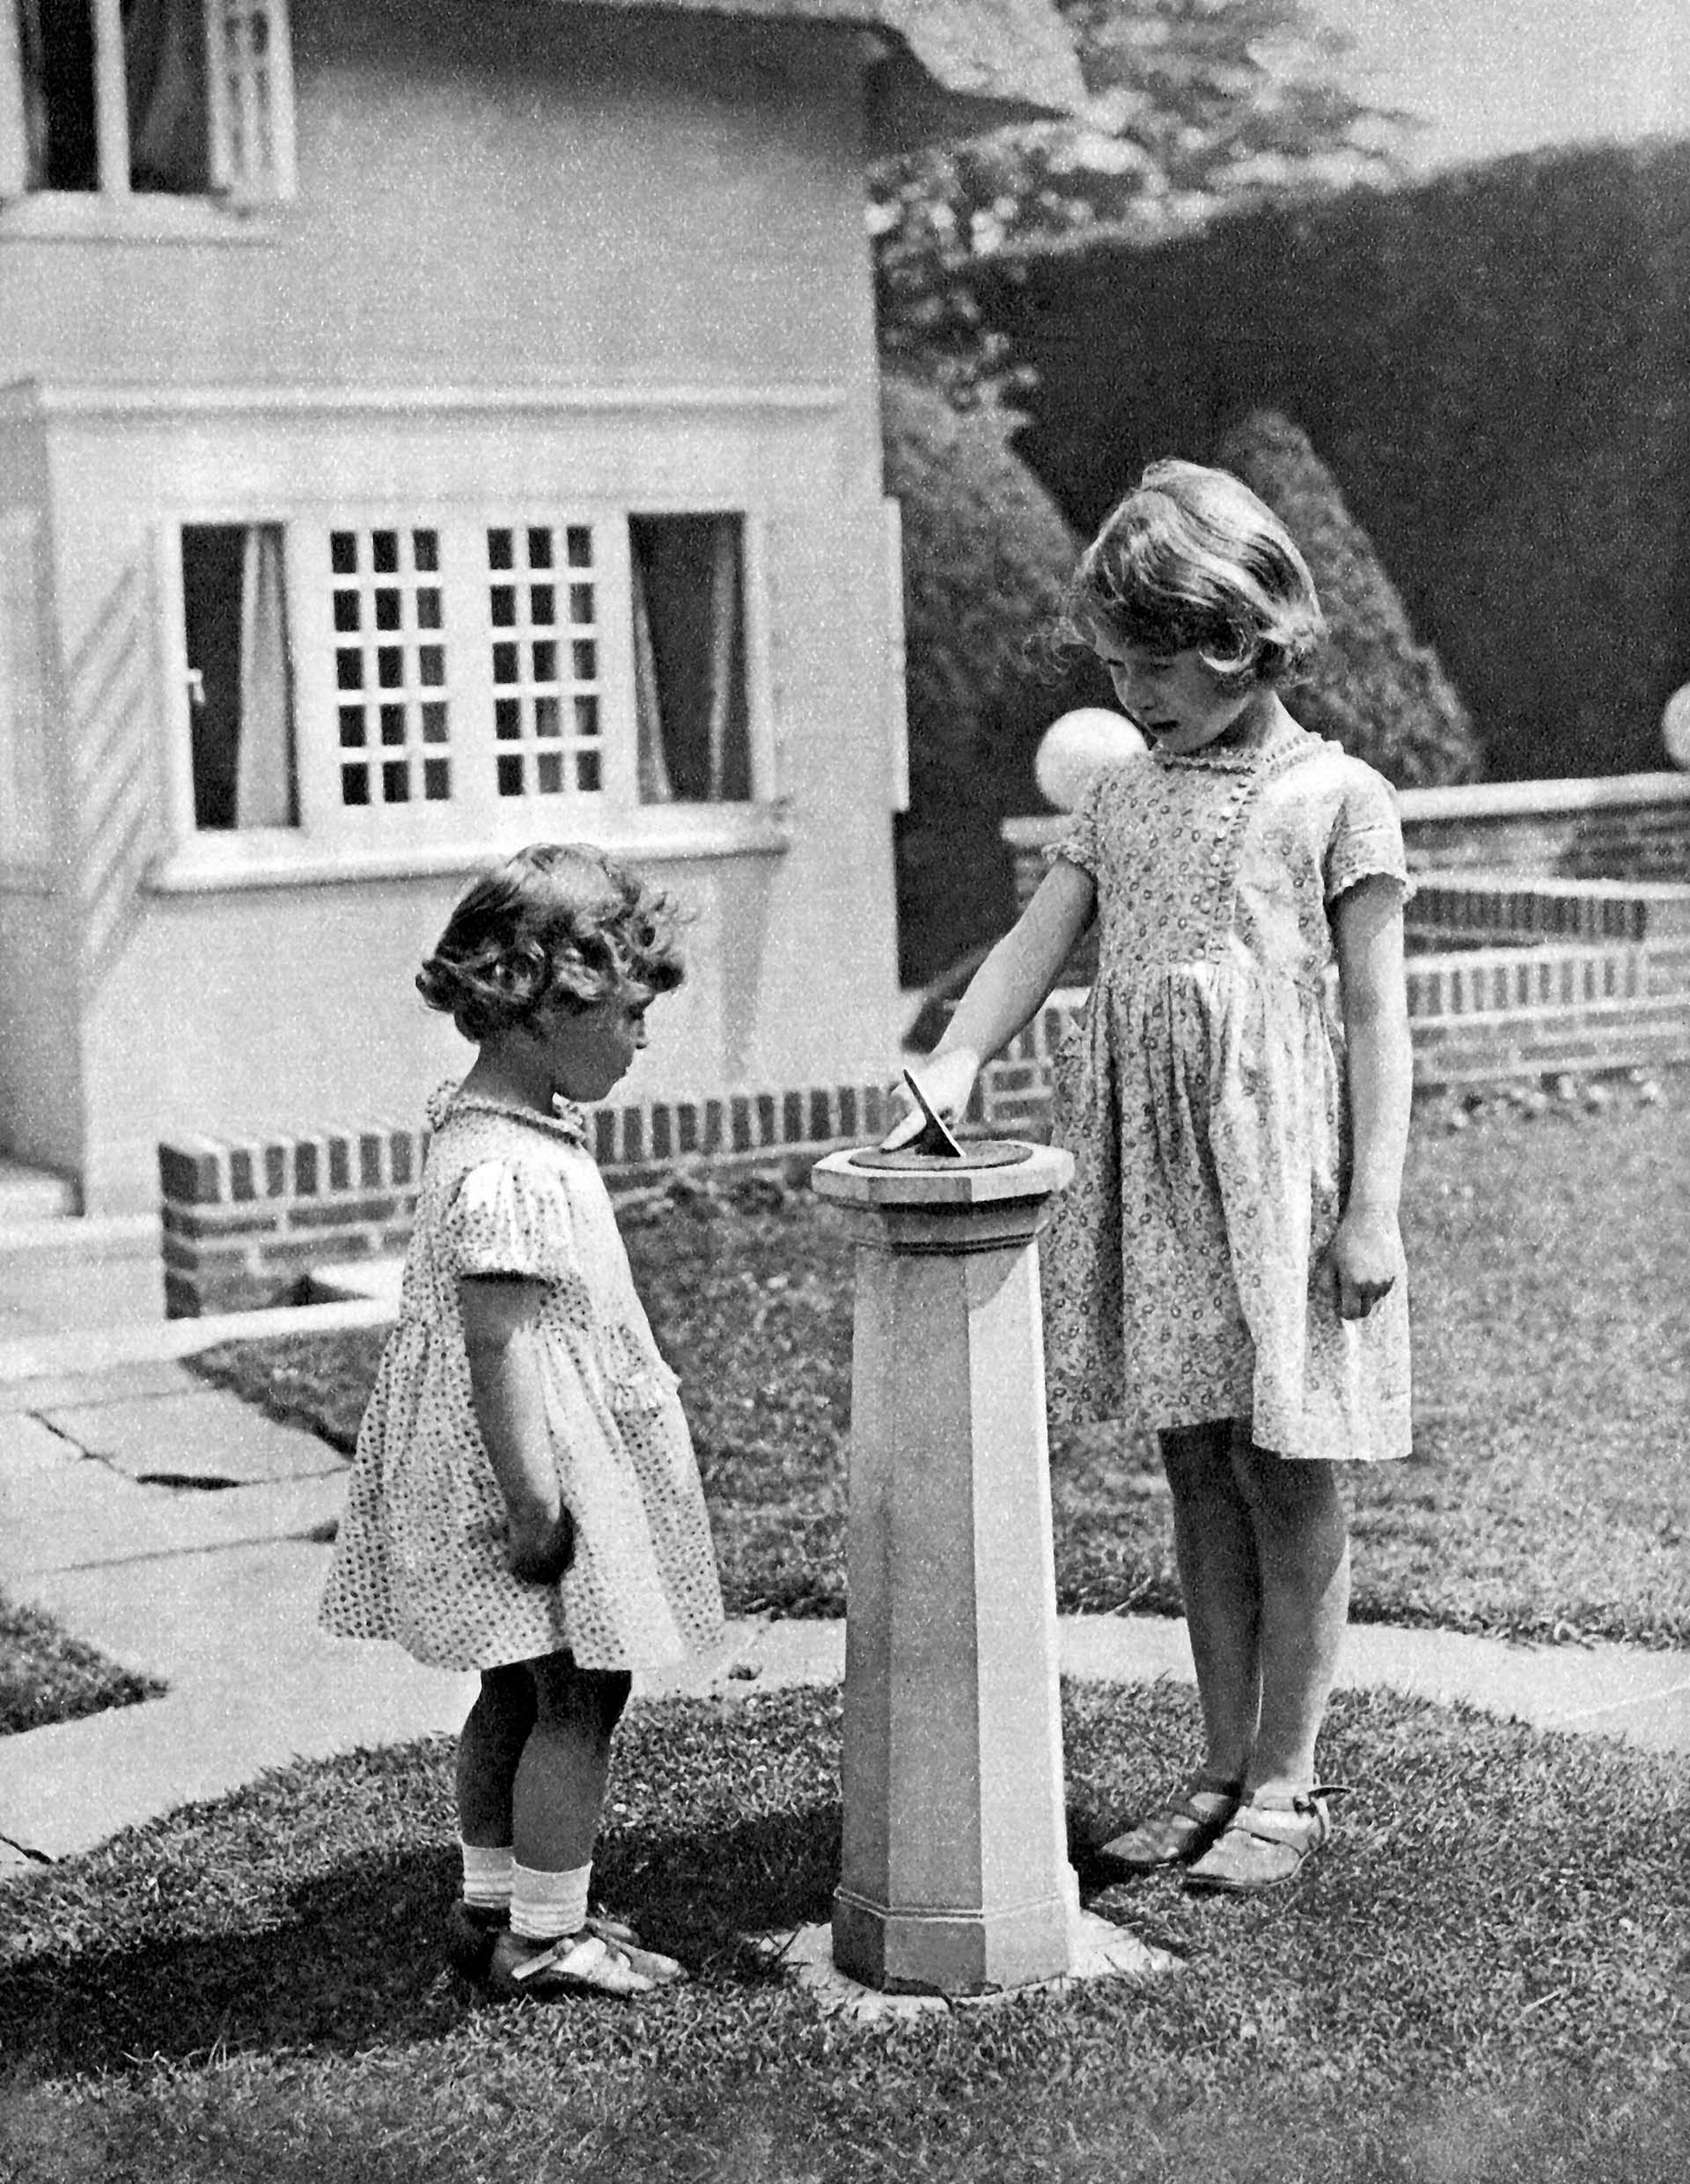 Princess Elizabeth (to become Queen Elizabeth II) and Princess Margaret as children in the 'grounds' of the model house - Y Bwthyn Bach - presented to them on Elizabeth's 6th birthday by the people of Wales, 1933 (Photo by Culture Club/Getty Images)